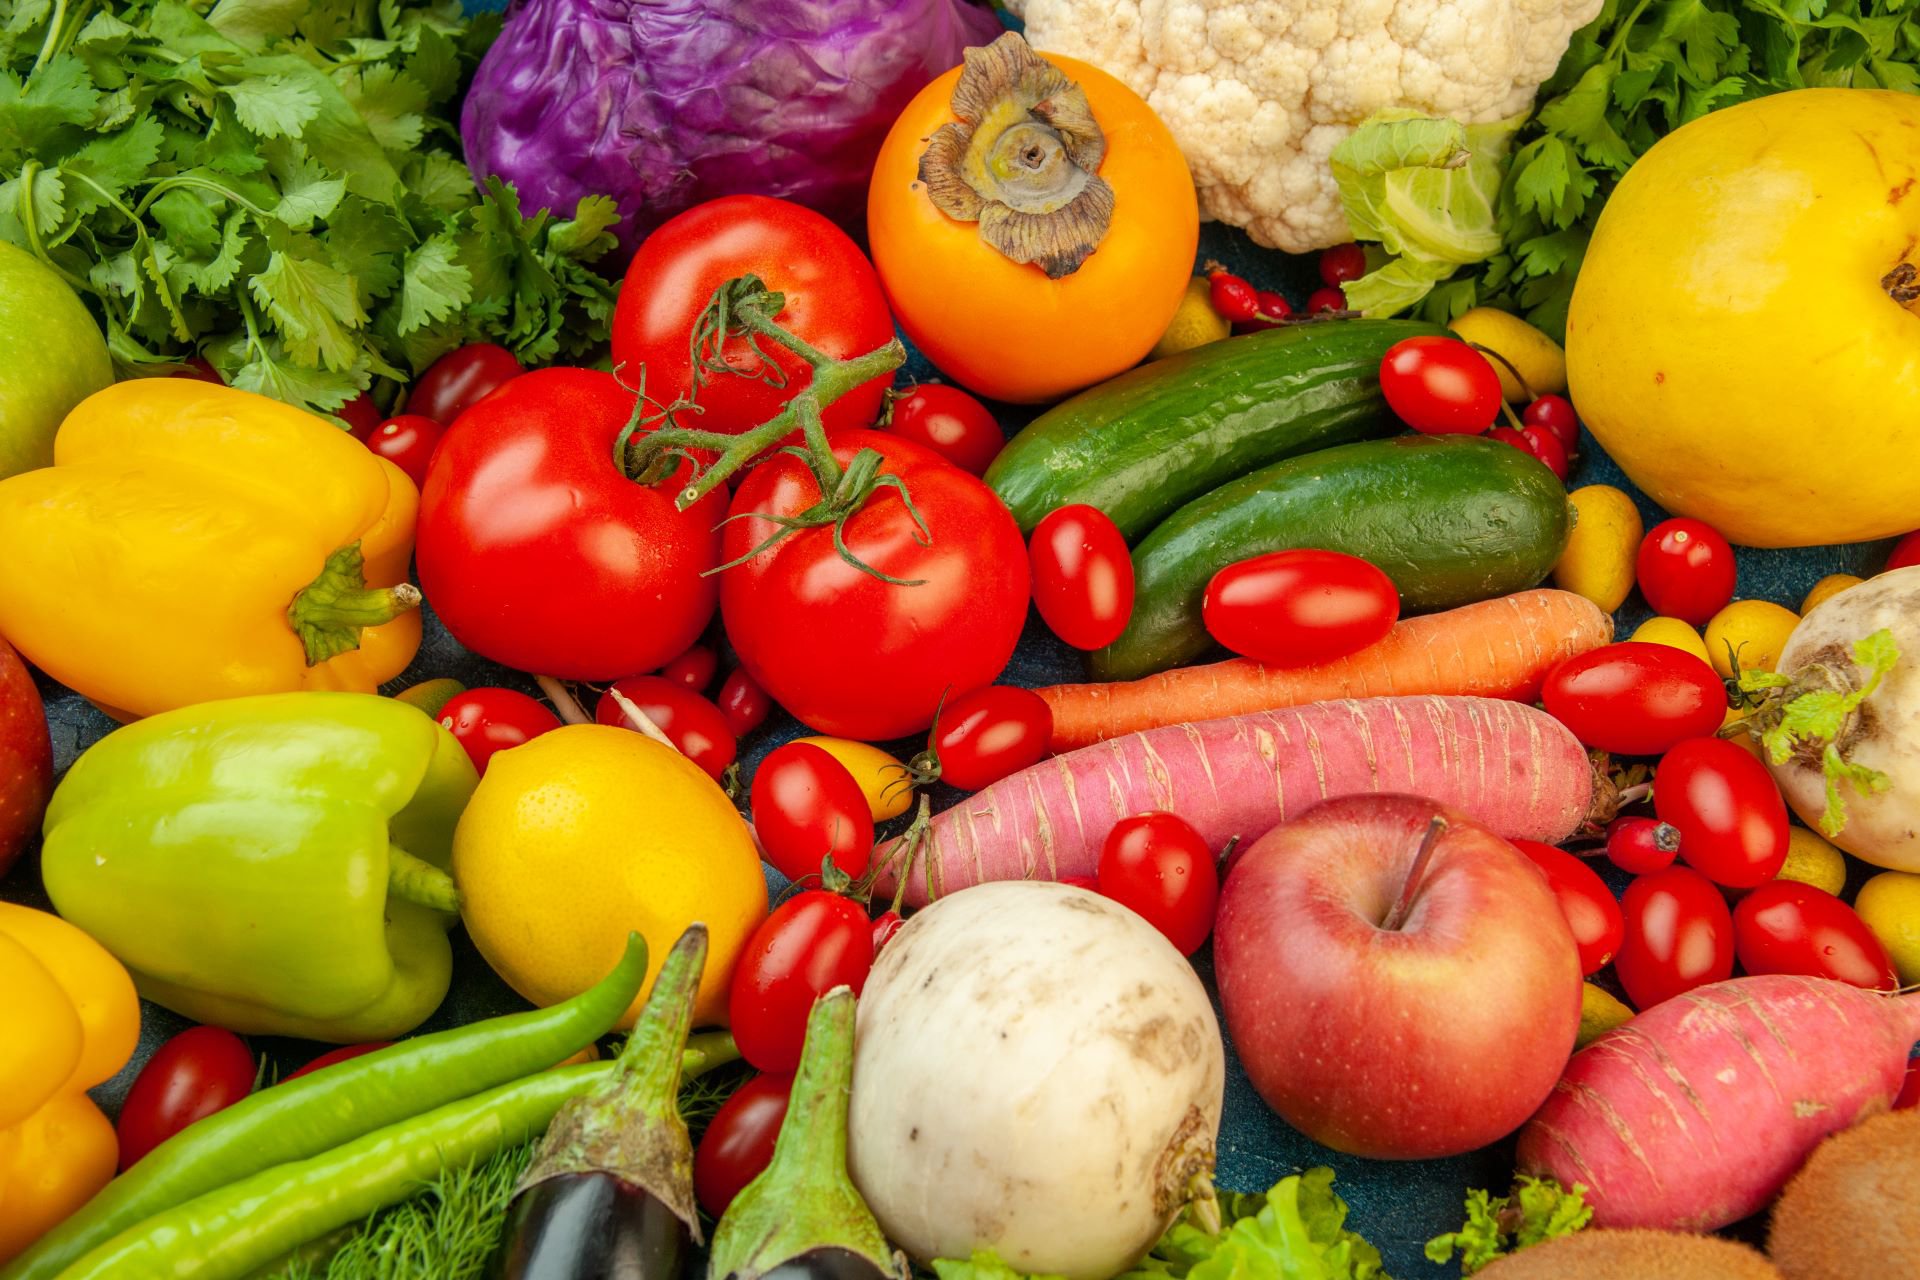 top-view-fruits-and-vegetables-eggplant-bell-peppers-apples-carrot-coriander-cauliflower-persimmon-radish-cherry-tomatoes-on-blue-background